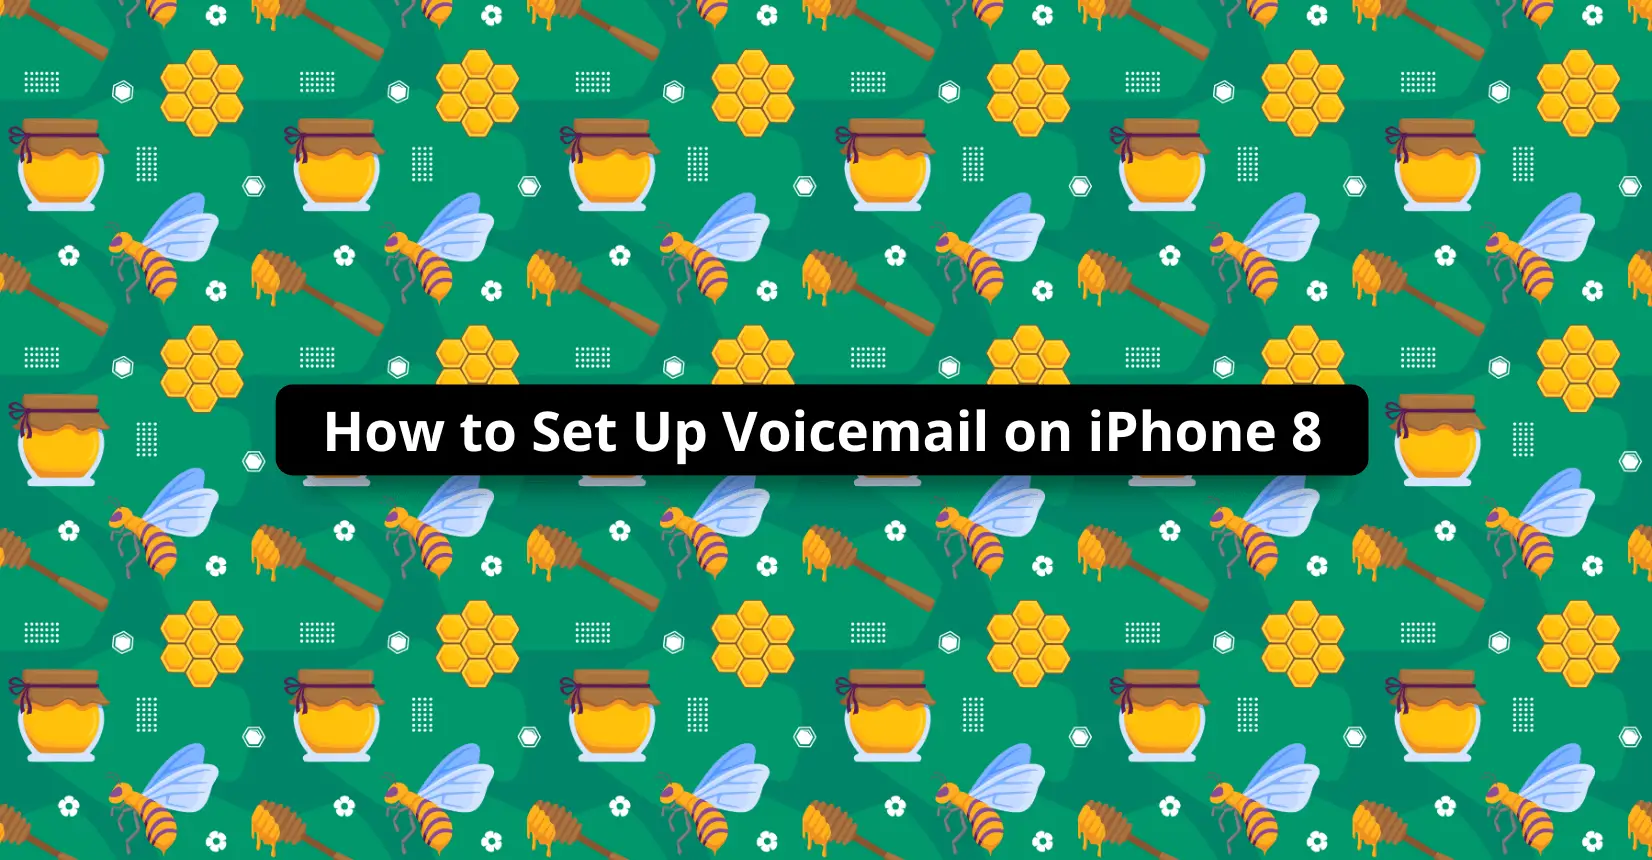 How to Set Up Voicemail on iPhone 8